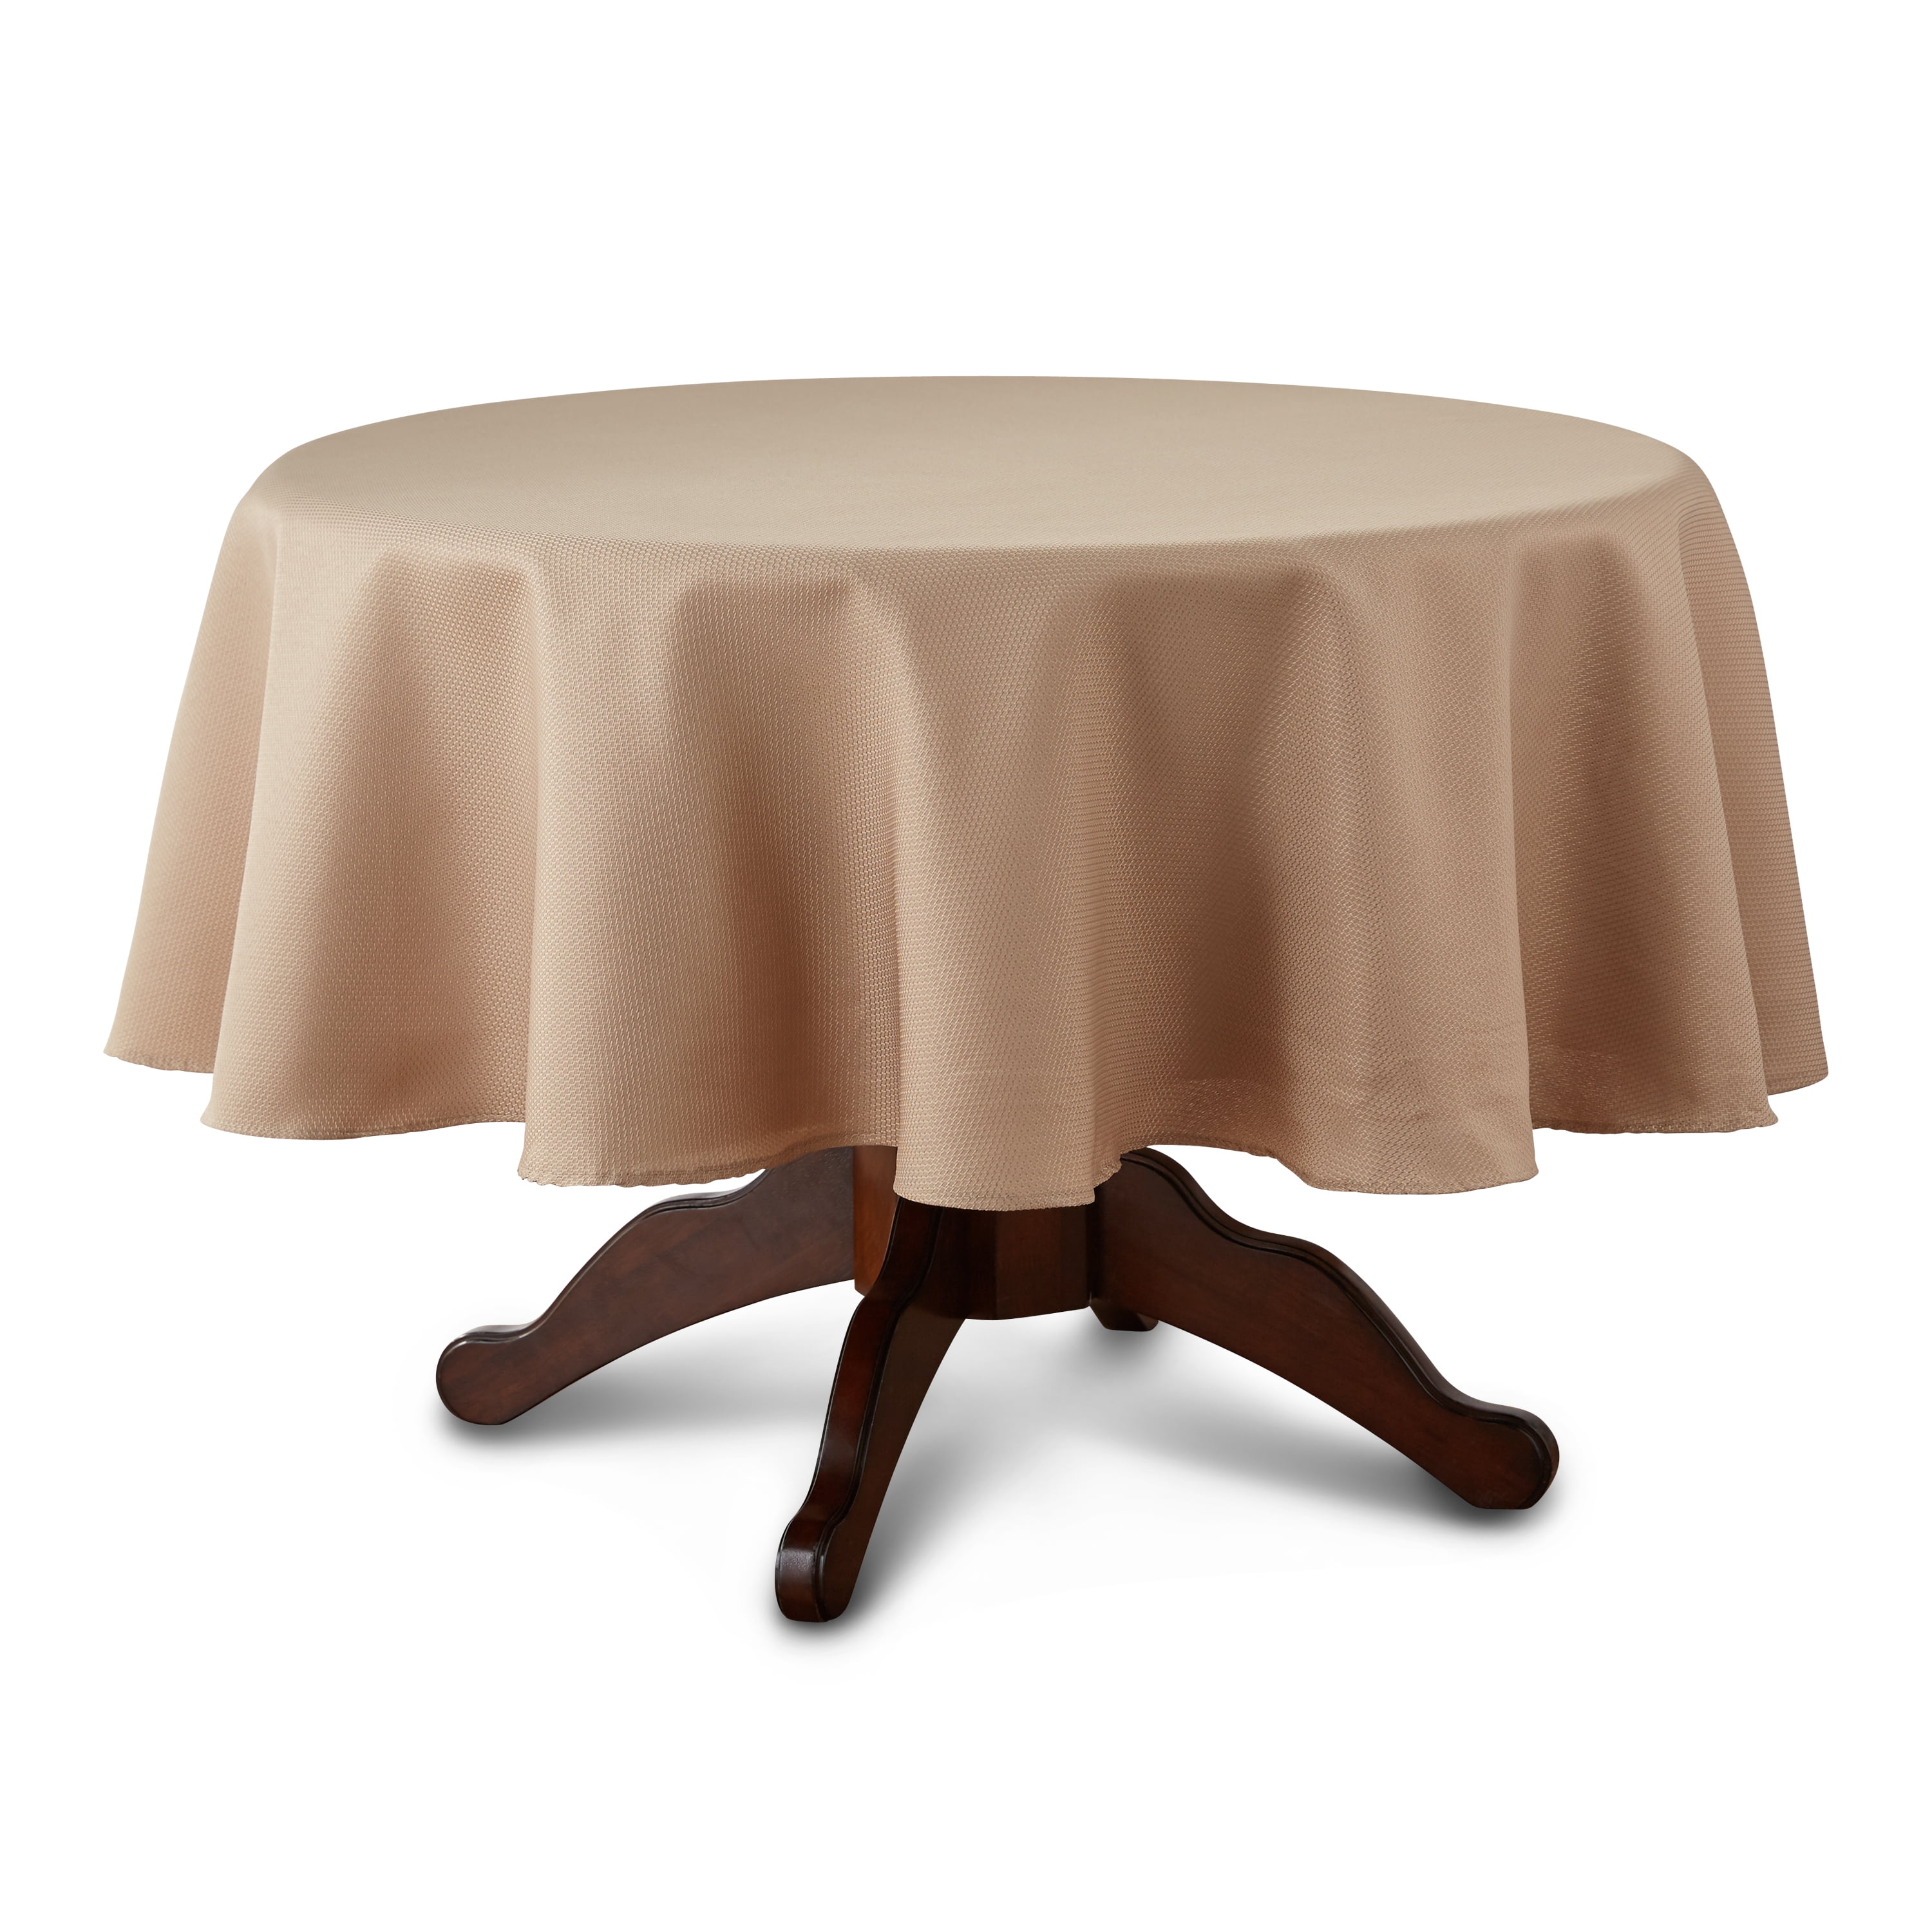 BROWN ROUND TABLECLOTH POLYESTER TABLE CLOTH VARIOUS SIZES BROWN TABLECLOTH 